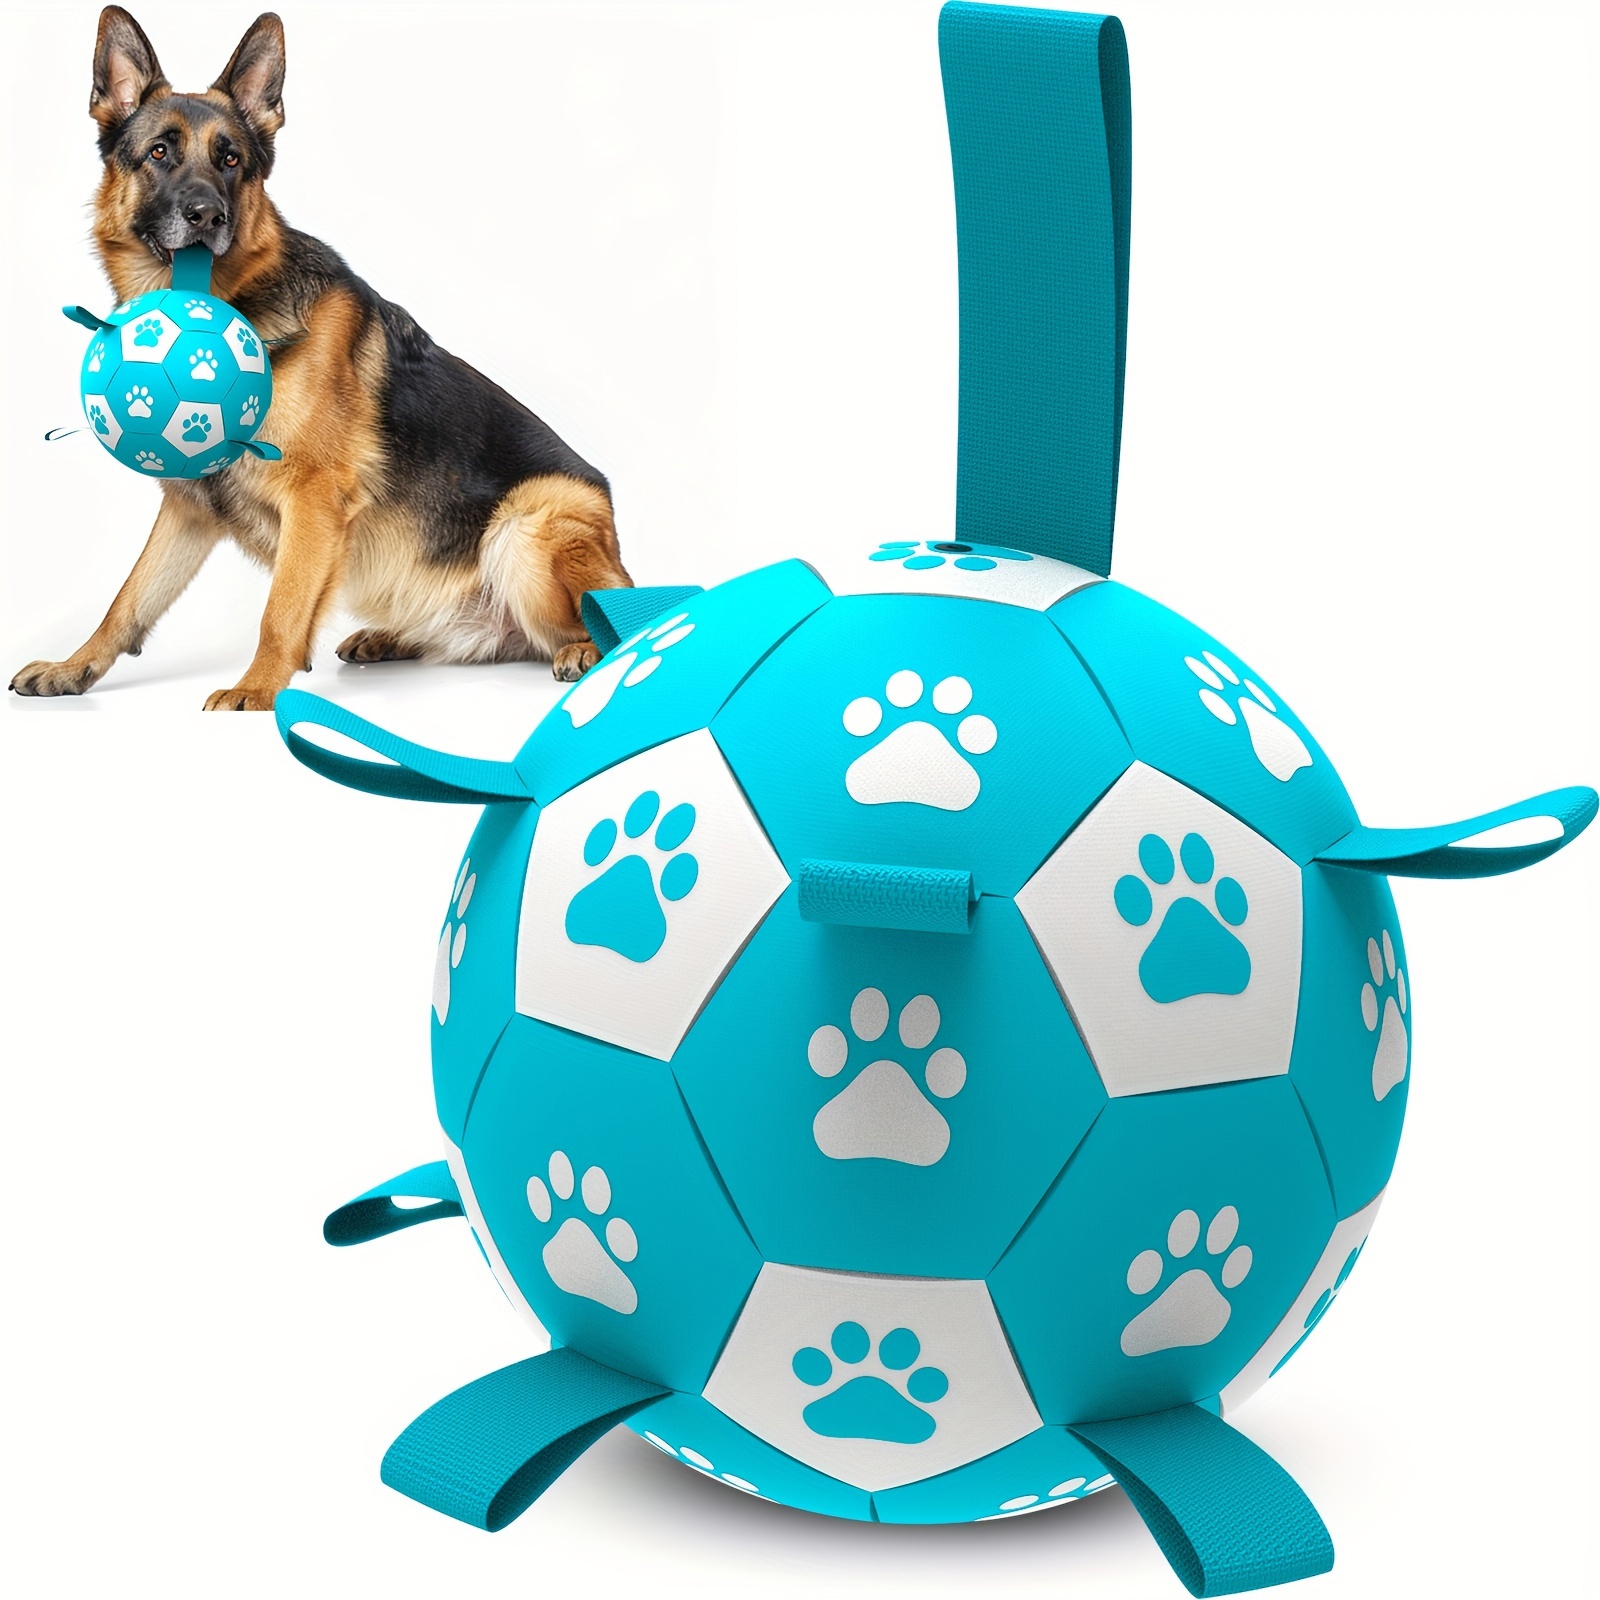 

Rucacio Interactive Dog Soccer Ball With Straps - Durable, Bouncy & Water-friendly Toy For All Breeds - Blue & White Paw Print Design